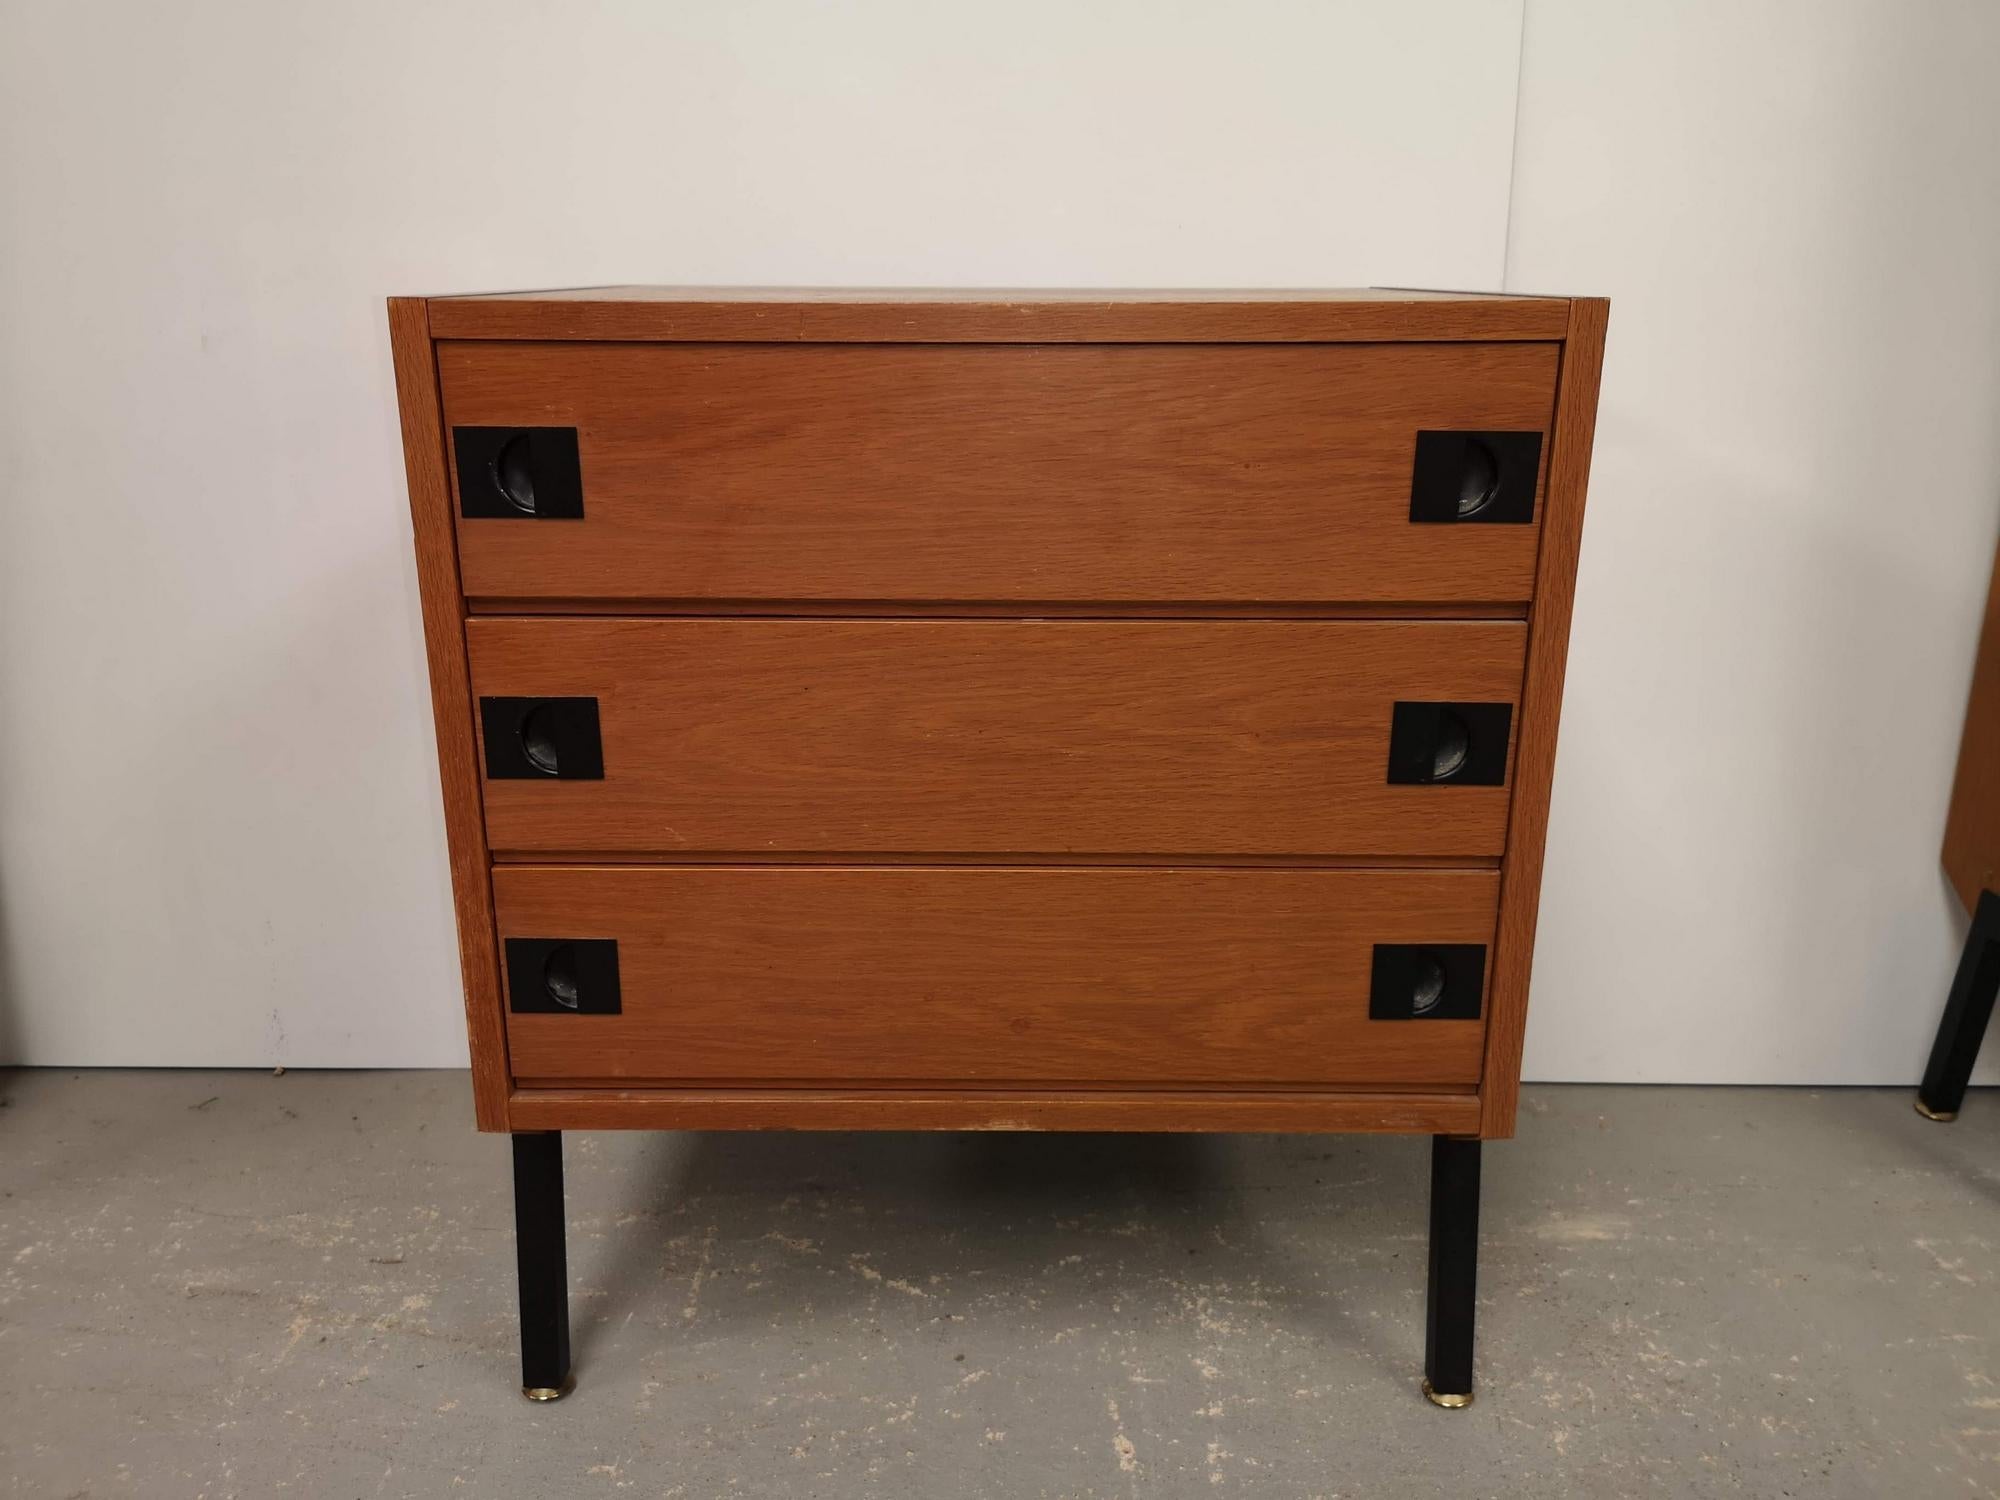 One chest of drawers in blond oak and black metal, it dates from the 1950s, very trendy current
decoration.
The cabinet baseis rectangular, three drawers with designer lines, square design.
The piece of furniture is by Jean René Caillete, a